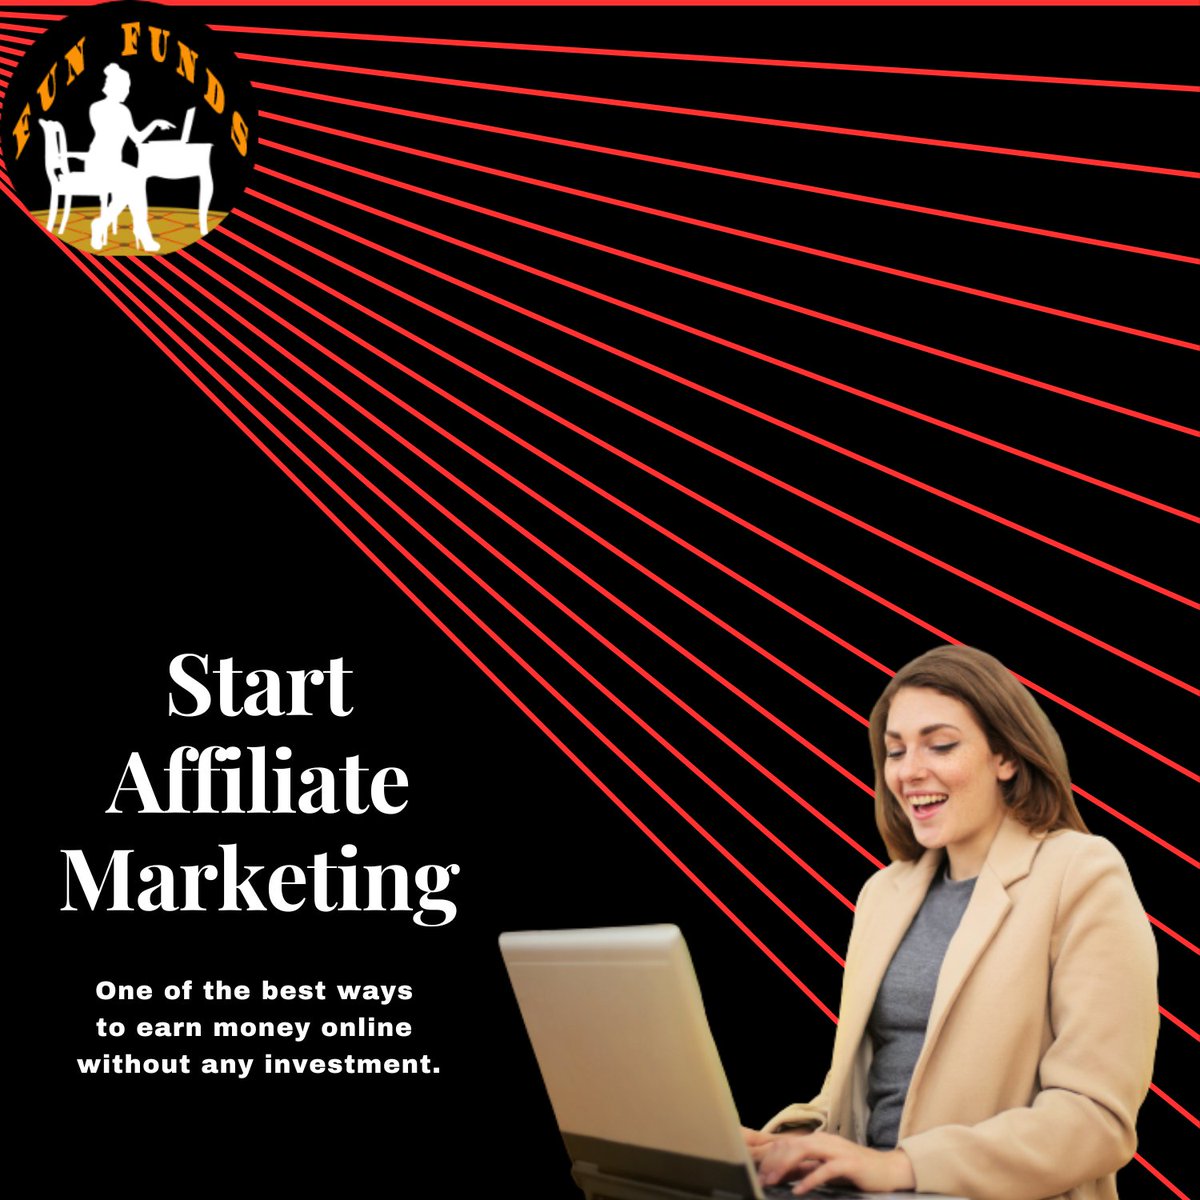 Are you looking for online work?

Start affiliate marketing with these three simple steps without spending any money.

mastpaisa.blogspot.com/p/3-simple-ste…

#mastpaisa #funfunds
#affiliatemarketing  #work #marketing #money #looking #onlinework #simplesteps #start #newbie #freshers #beginners